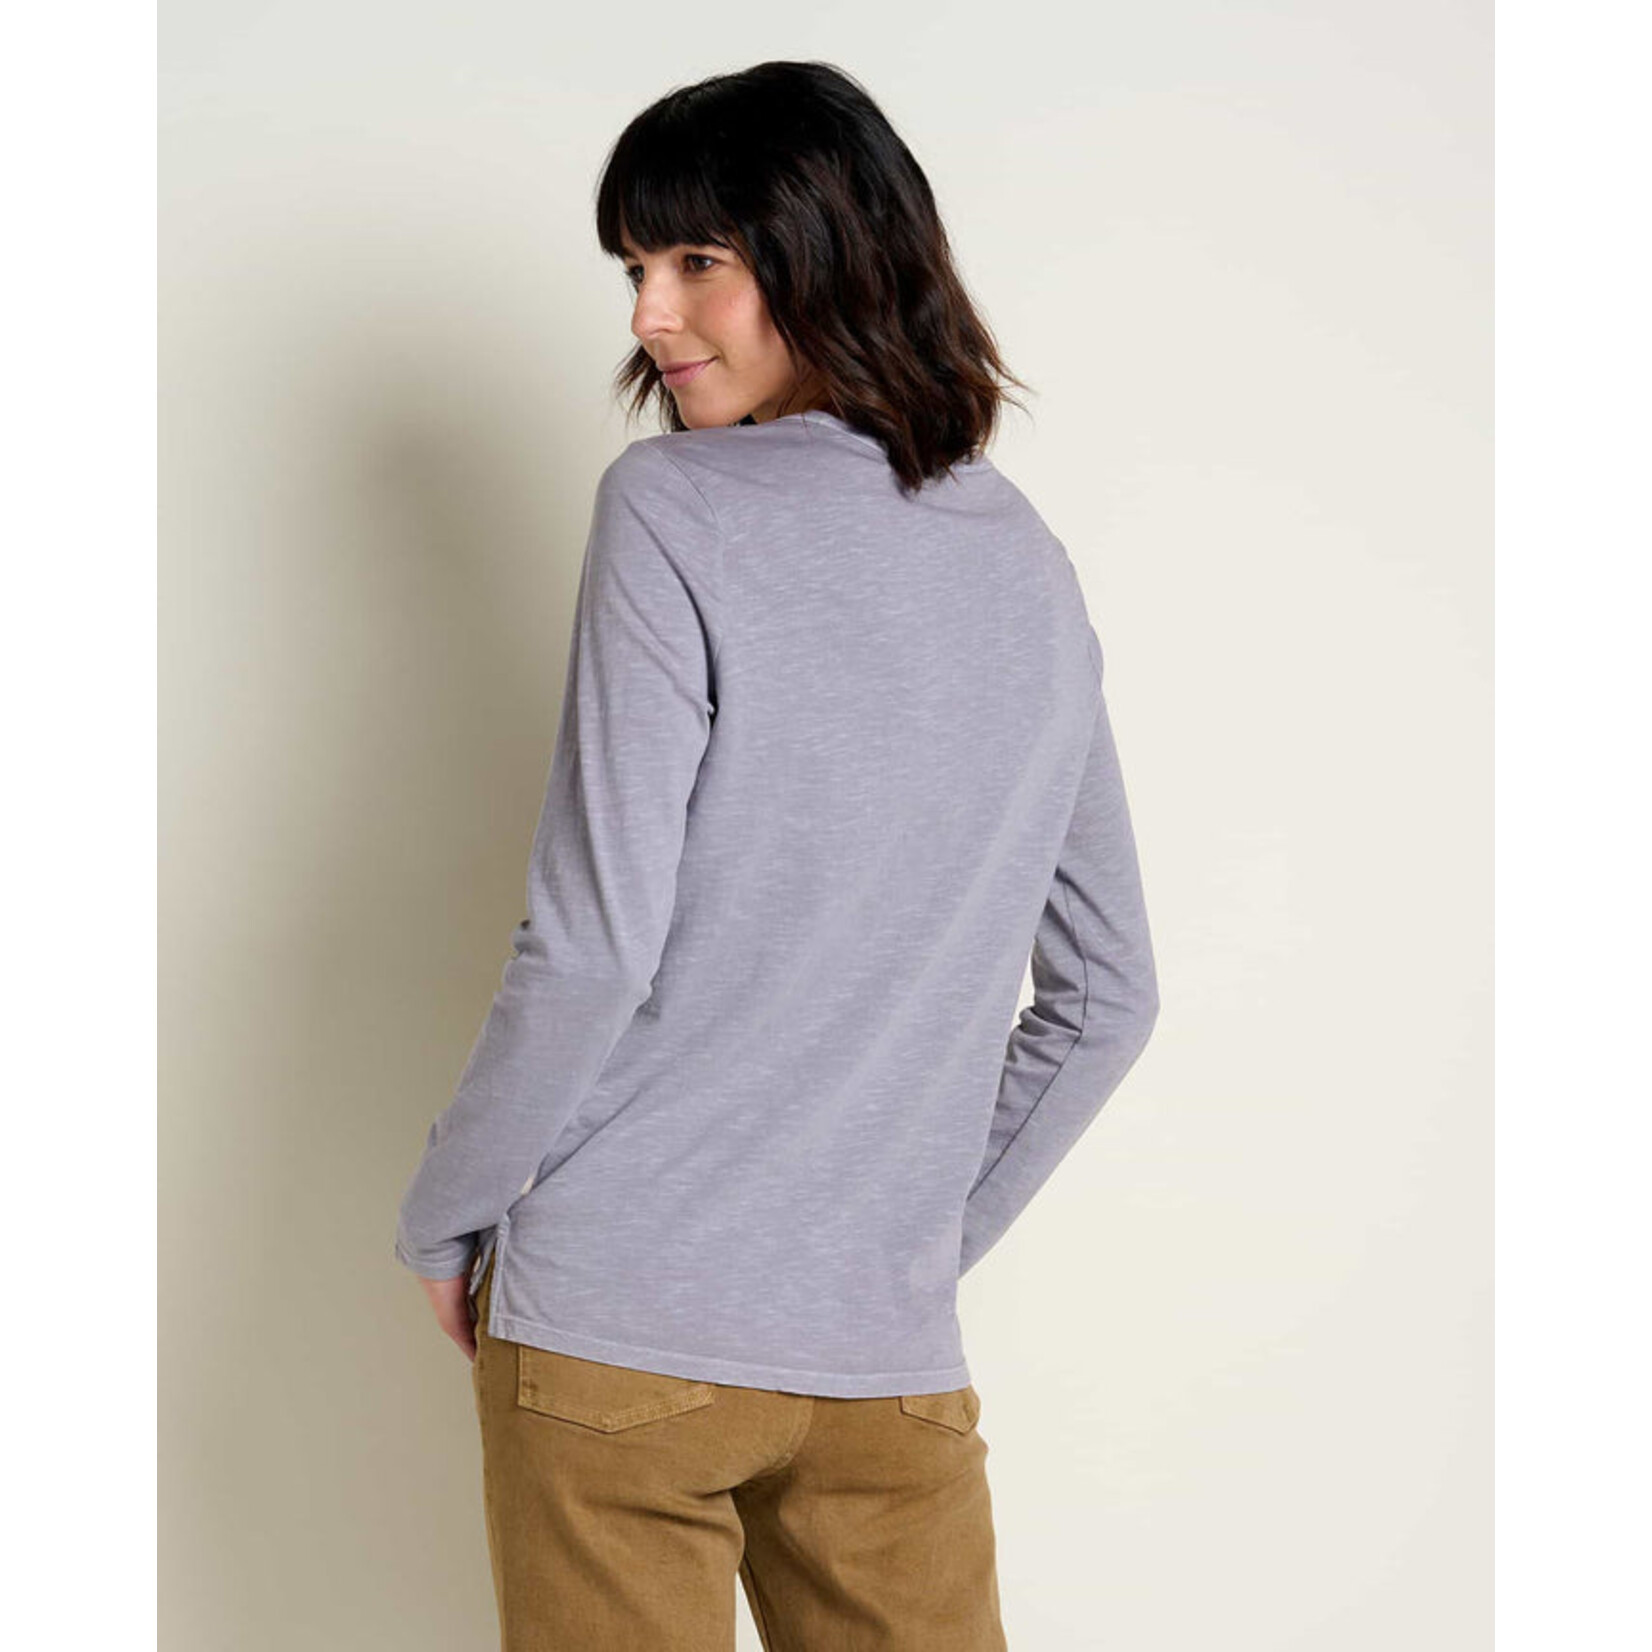 Toad & Co Women's Primo Long Sleeve Crew